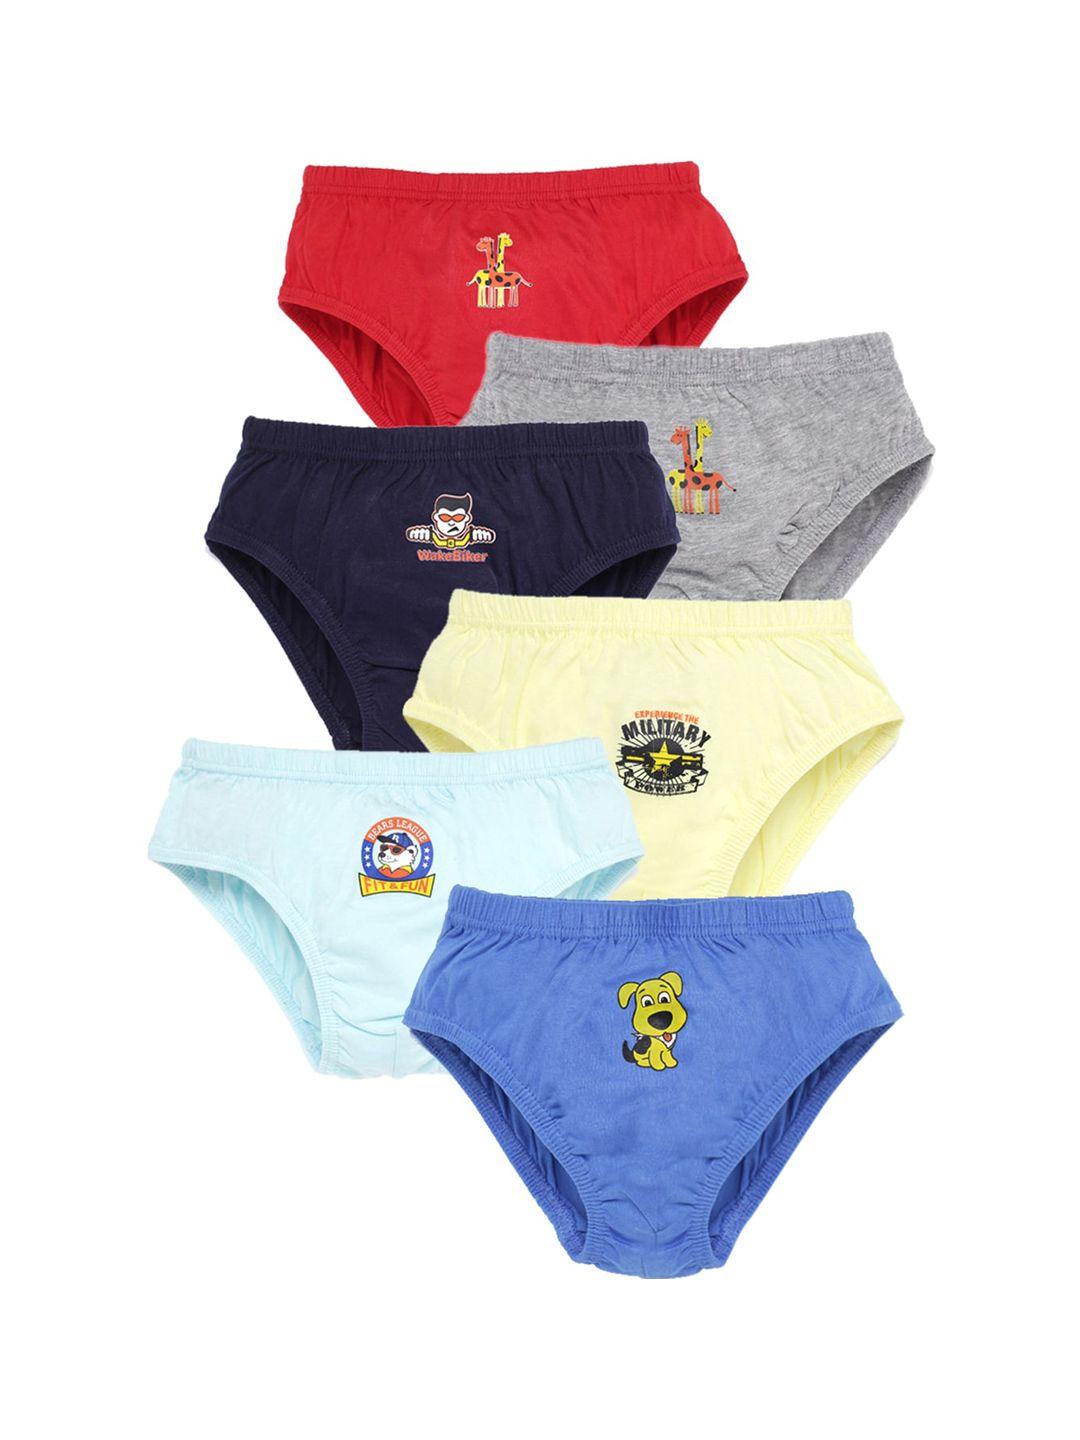 savage boys pack of 6 multicolored printed cotton basic briefs svg-boy-inel-undrw-55cm